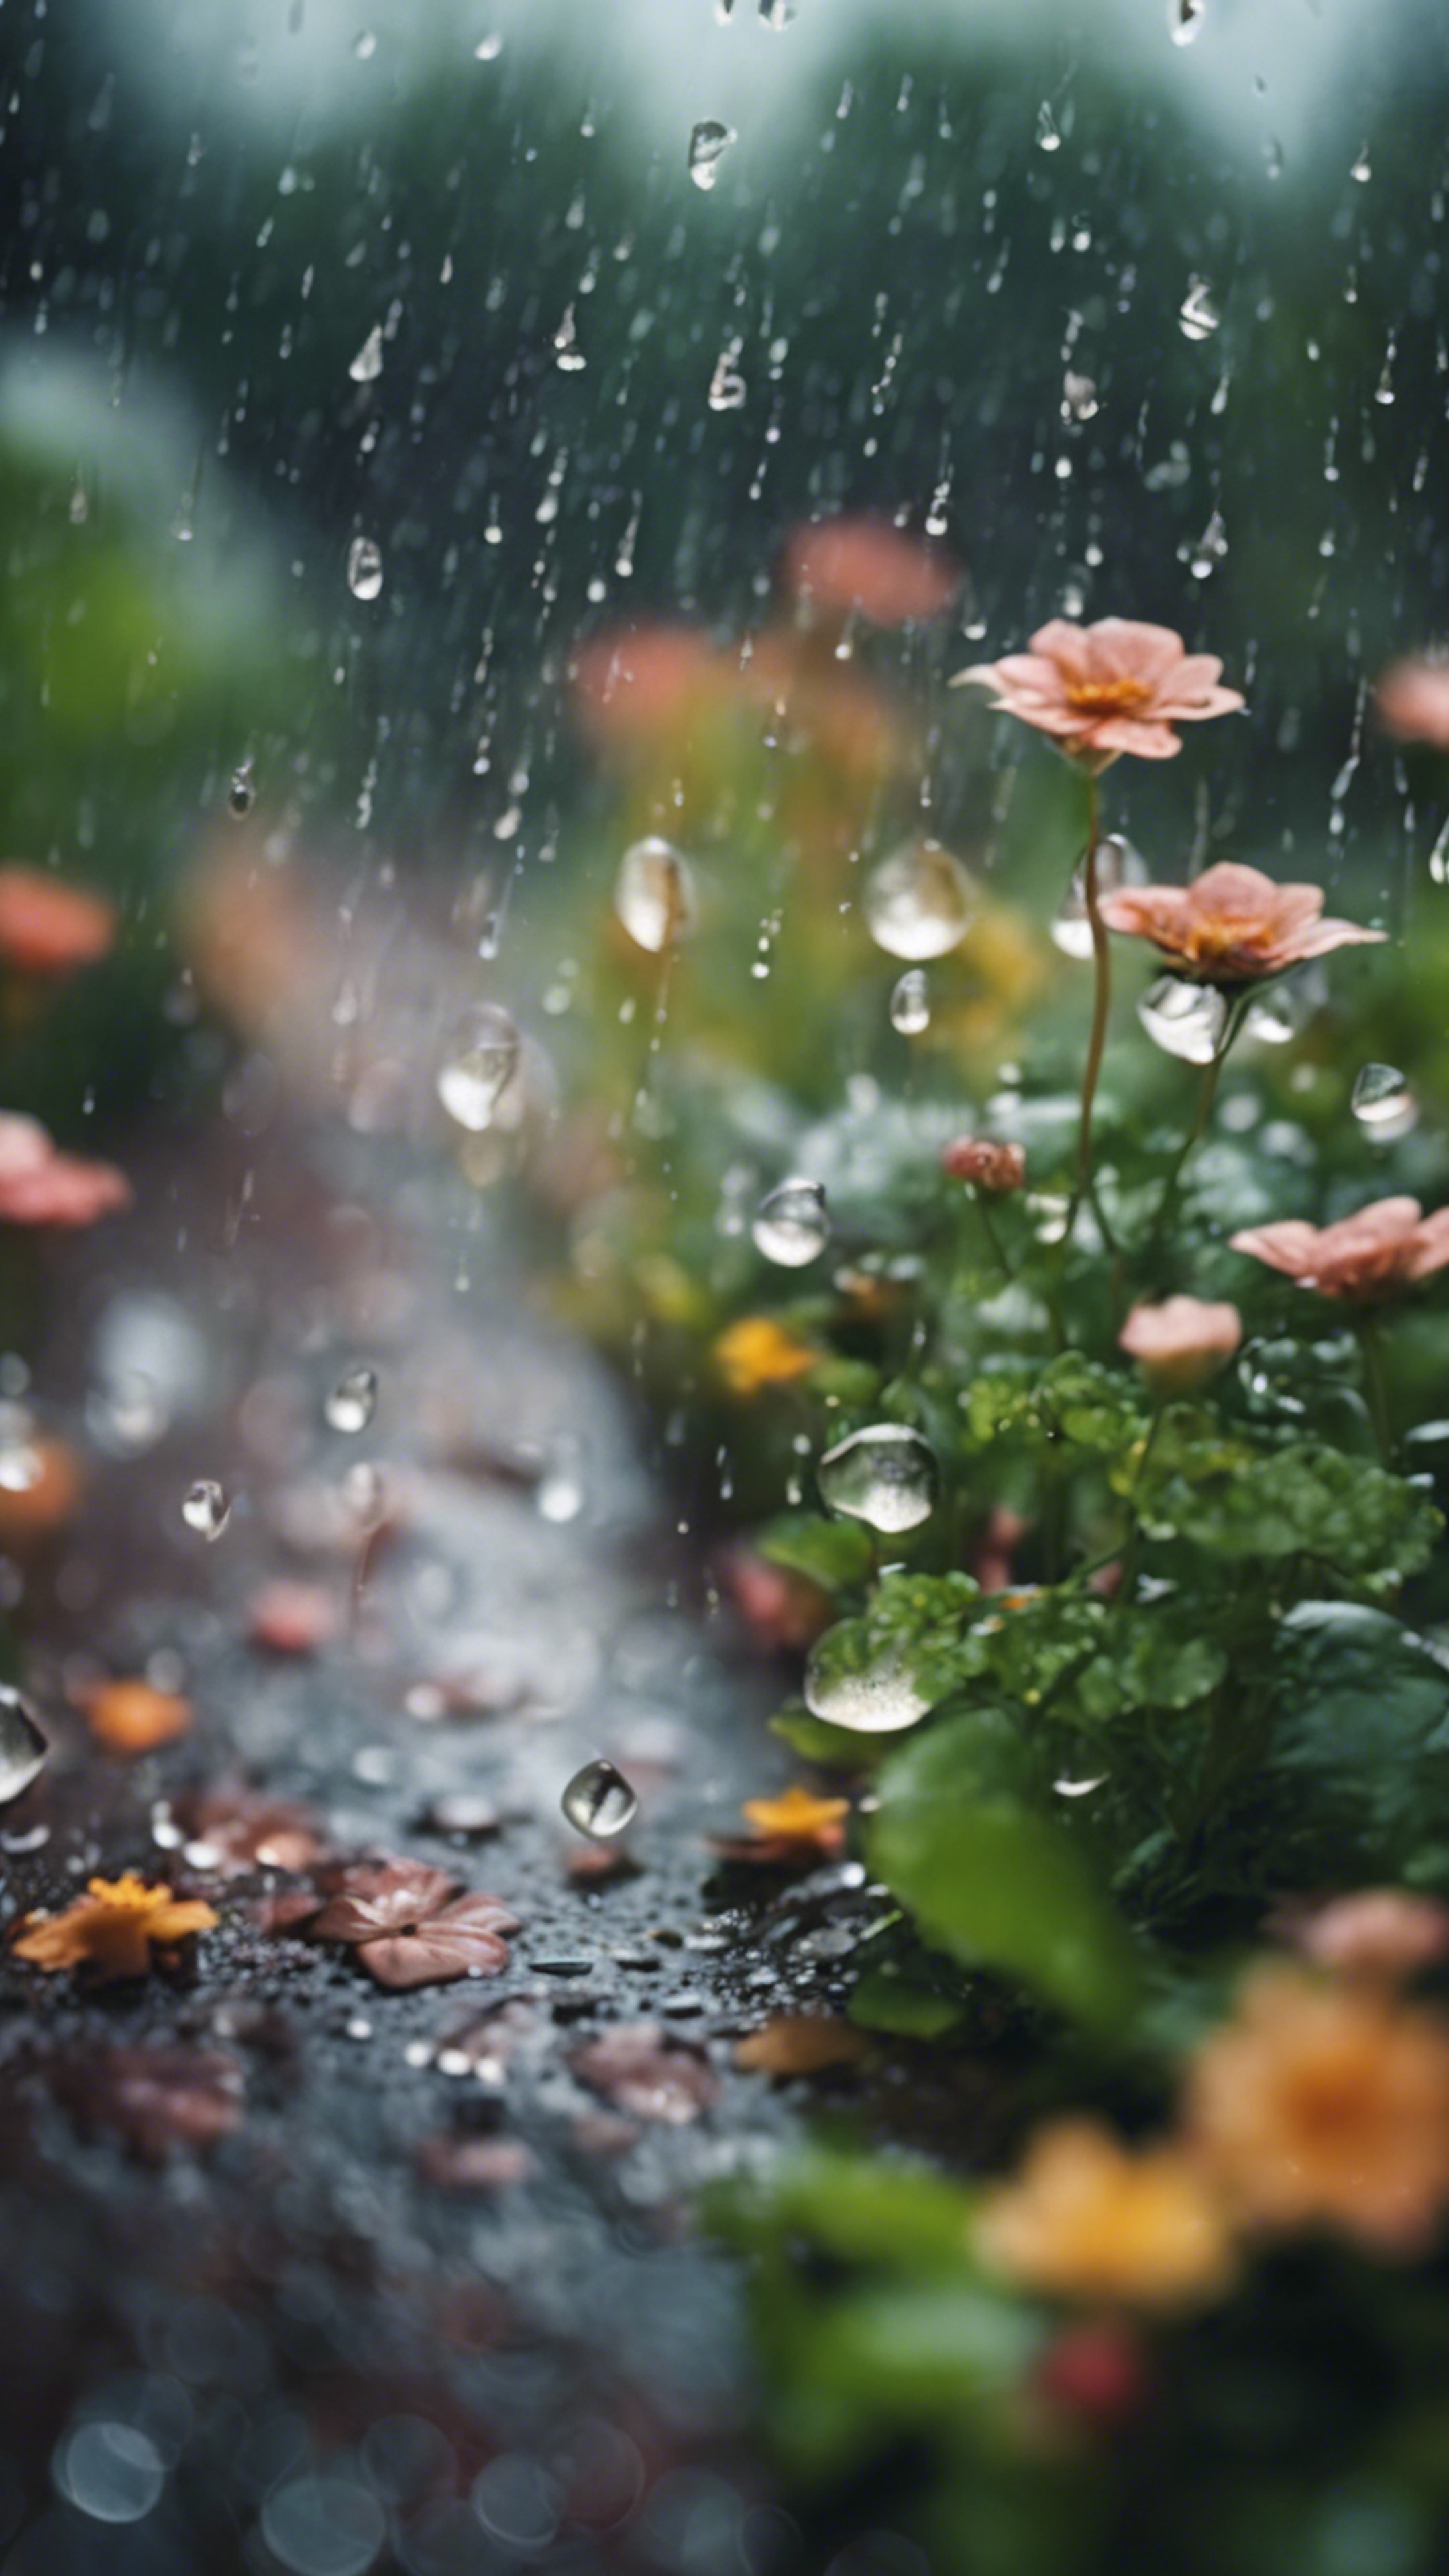 A tinkling rain garden during a soft rain shower, with raindrops dancing on the leaves and petals. 牆紙[725596f4b8c5433598b7]